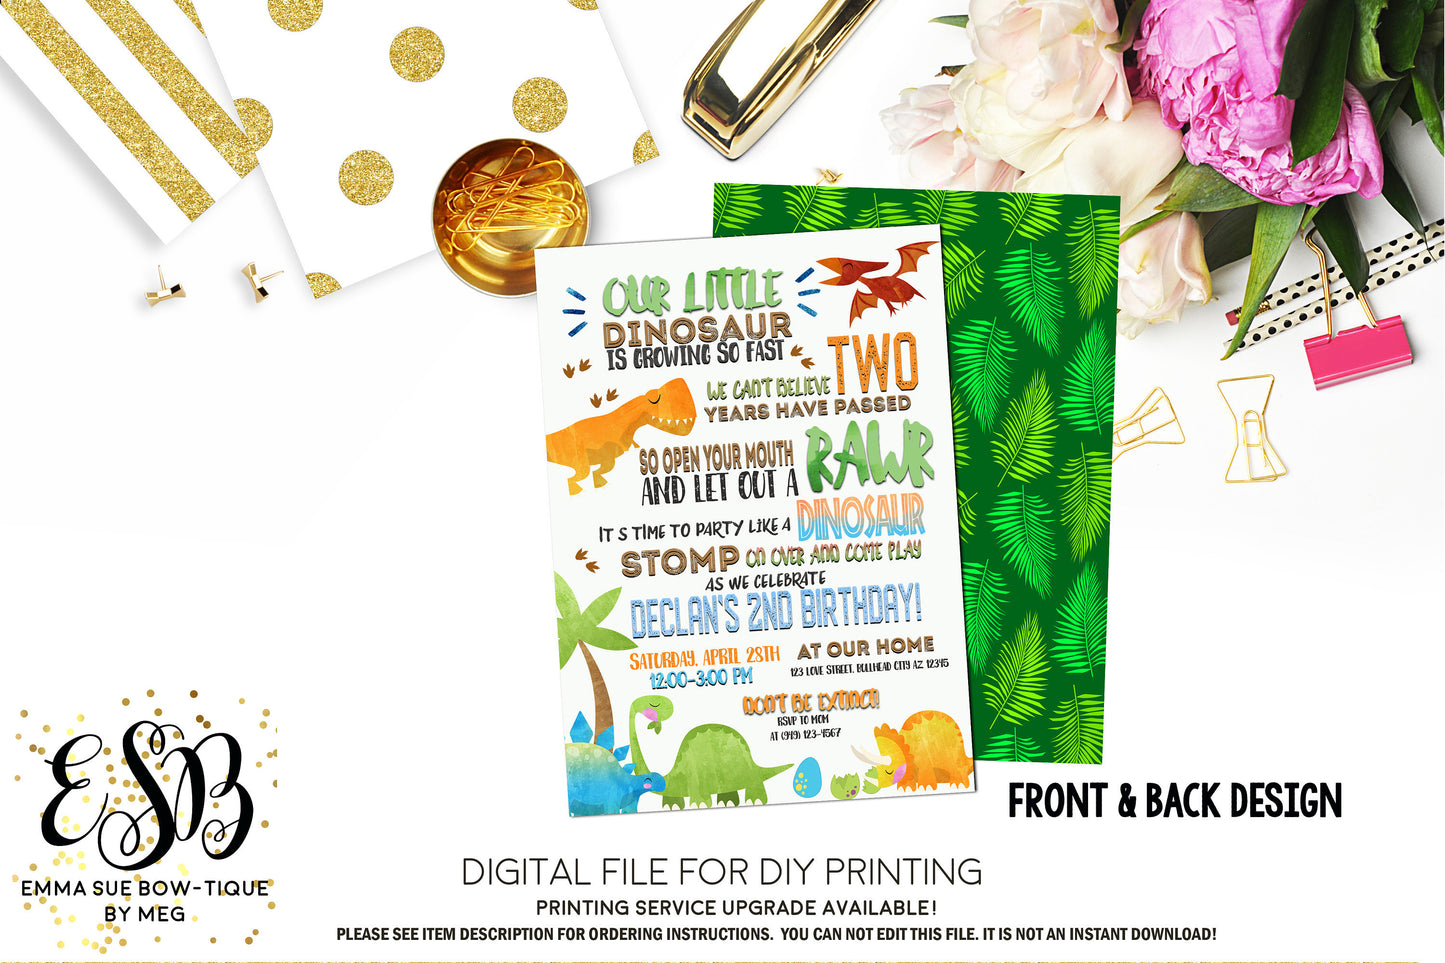 Our Little Dinosaur is growing so Fast Birthday Party Invitation Printable - Digital File  (Dino-stomp)